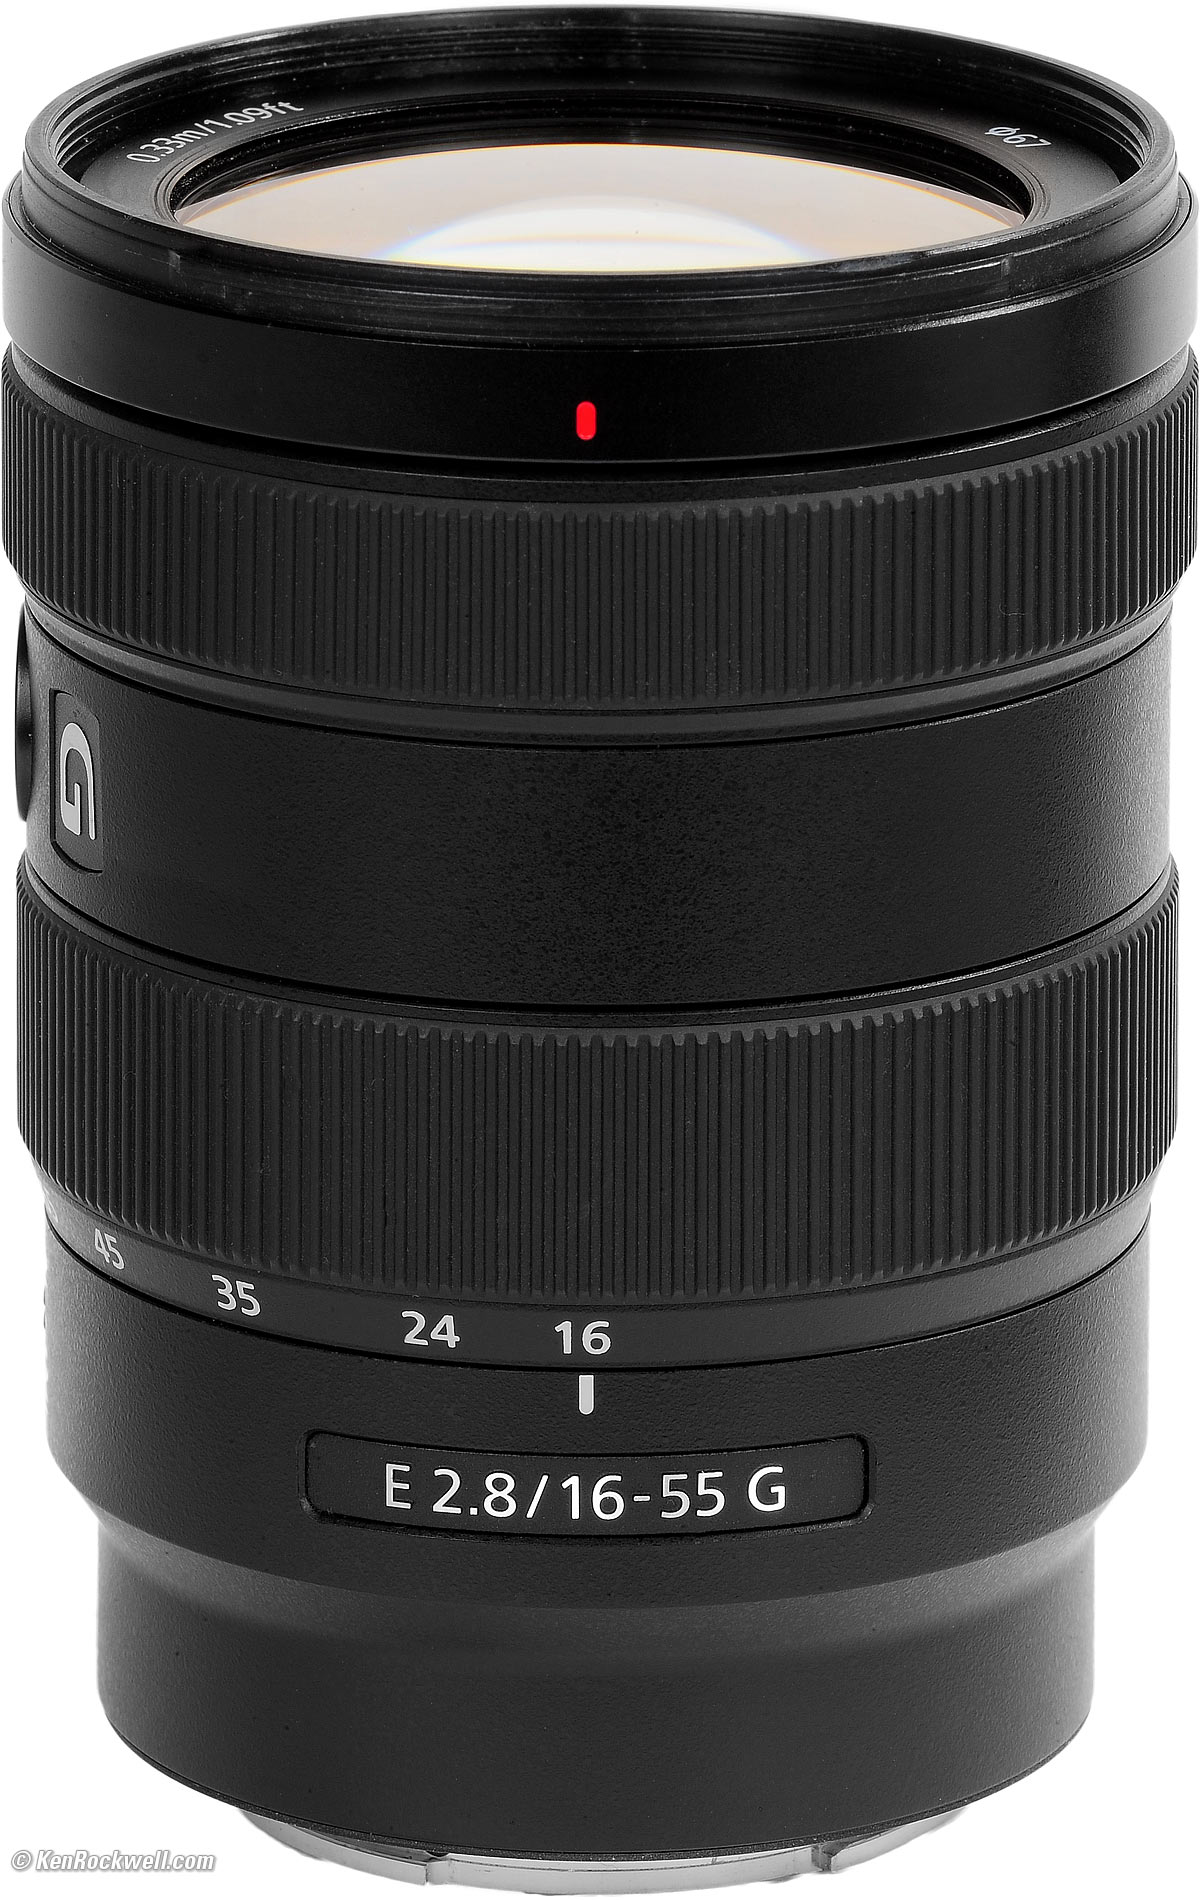 Sony E 16-55mm f/2.8 G Review